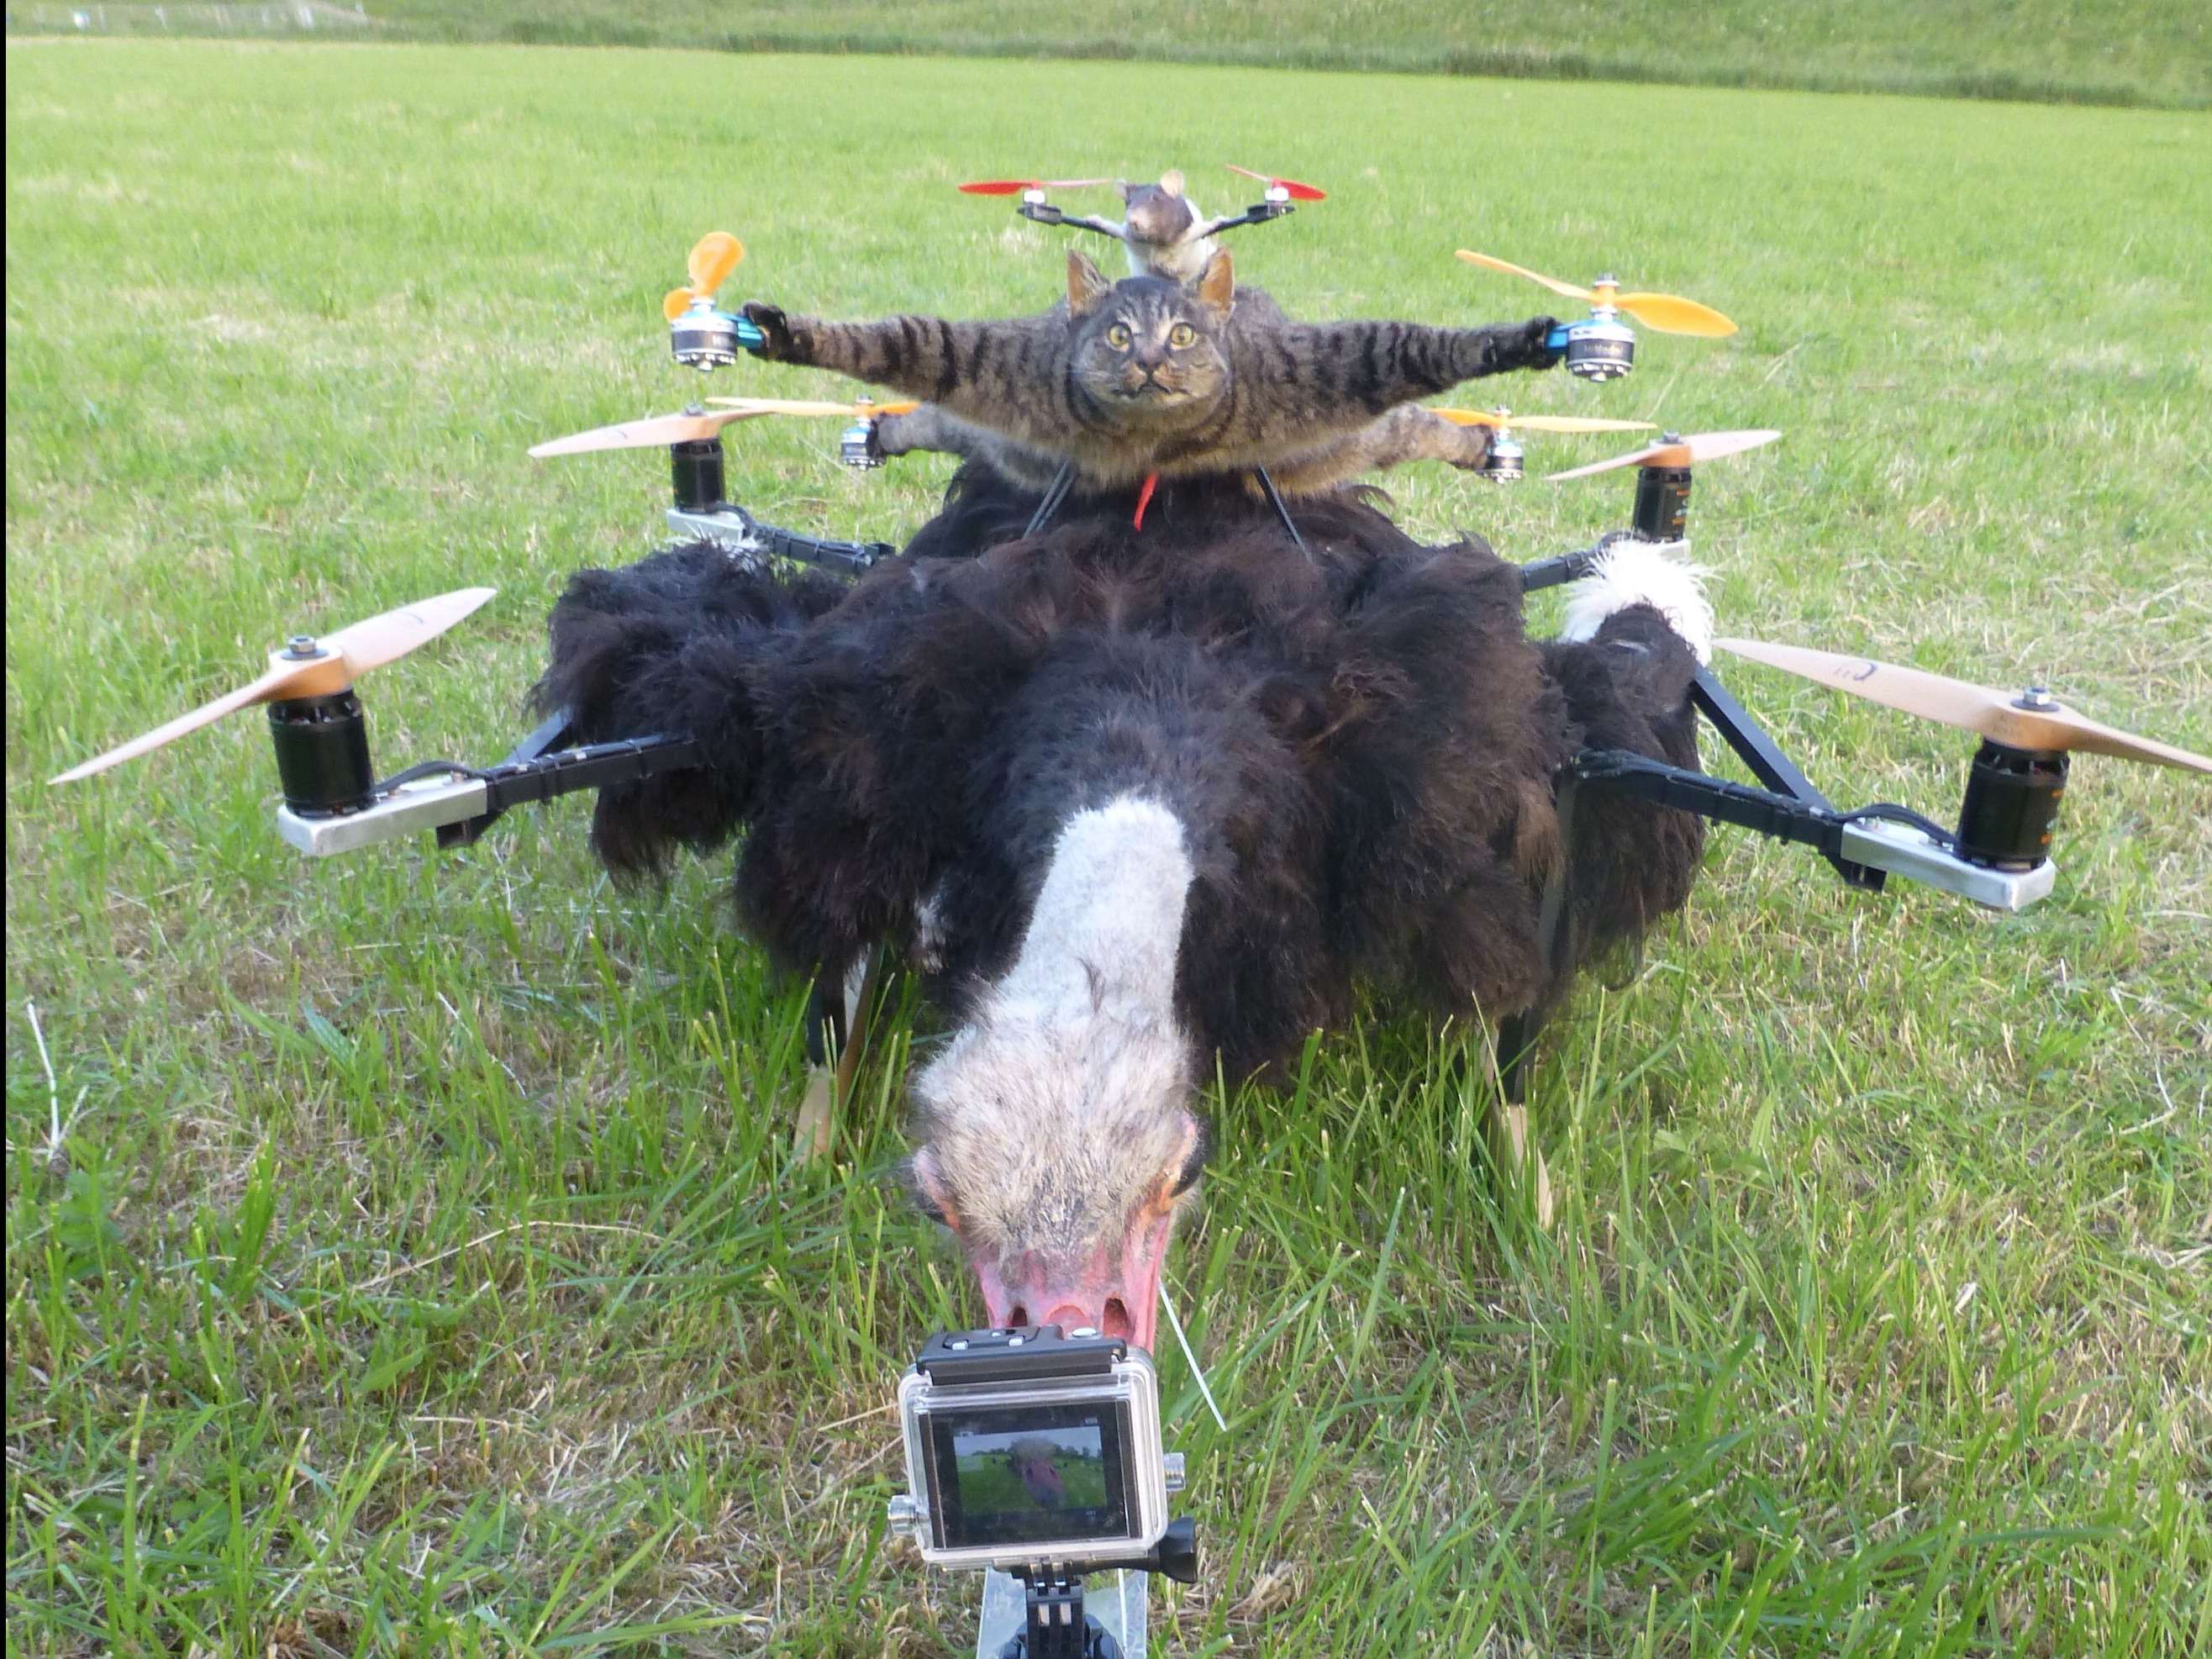 The artist who turned his cat into a drone is building a helicopter out of a cow BusinessInsider